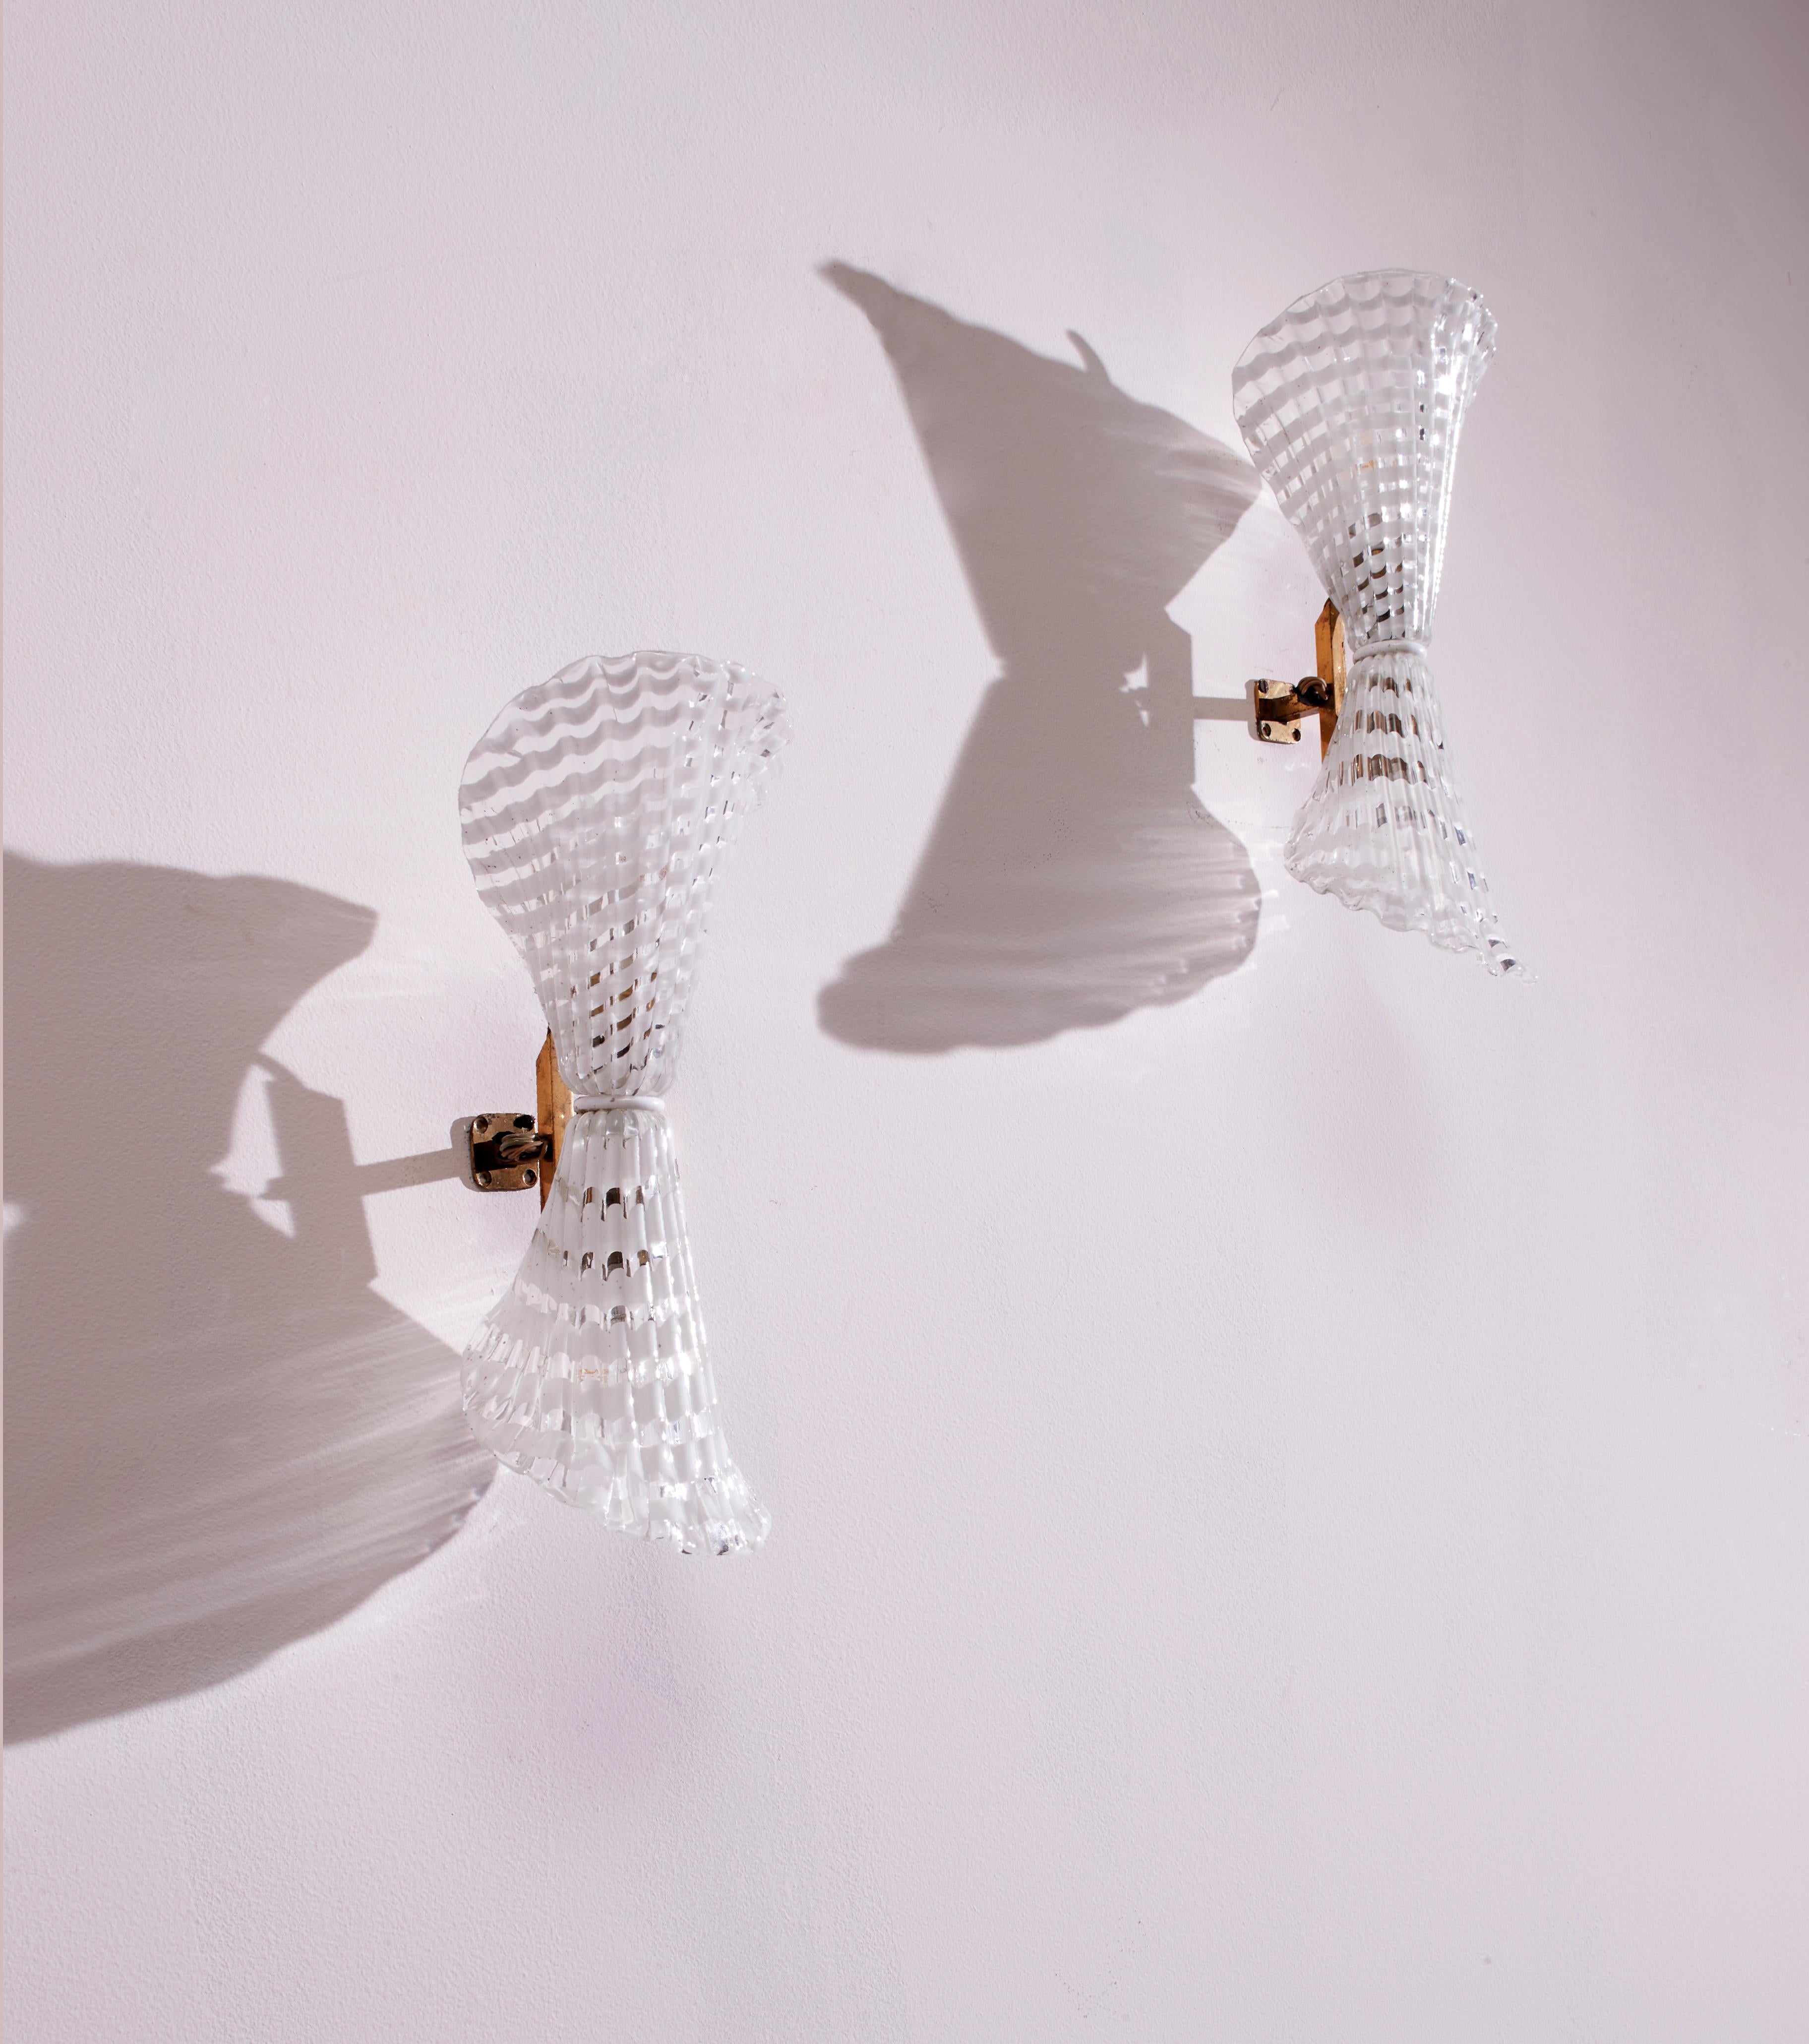 A pair of elegant Murano lattimo glass wall sconces, designed by Archimede Seguso, once adorned the interiors of the Hotel Bristol in Merano back in 1954.

These captivating wall sconces, born from the creative genius of Archimede Seguso,